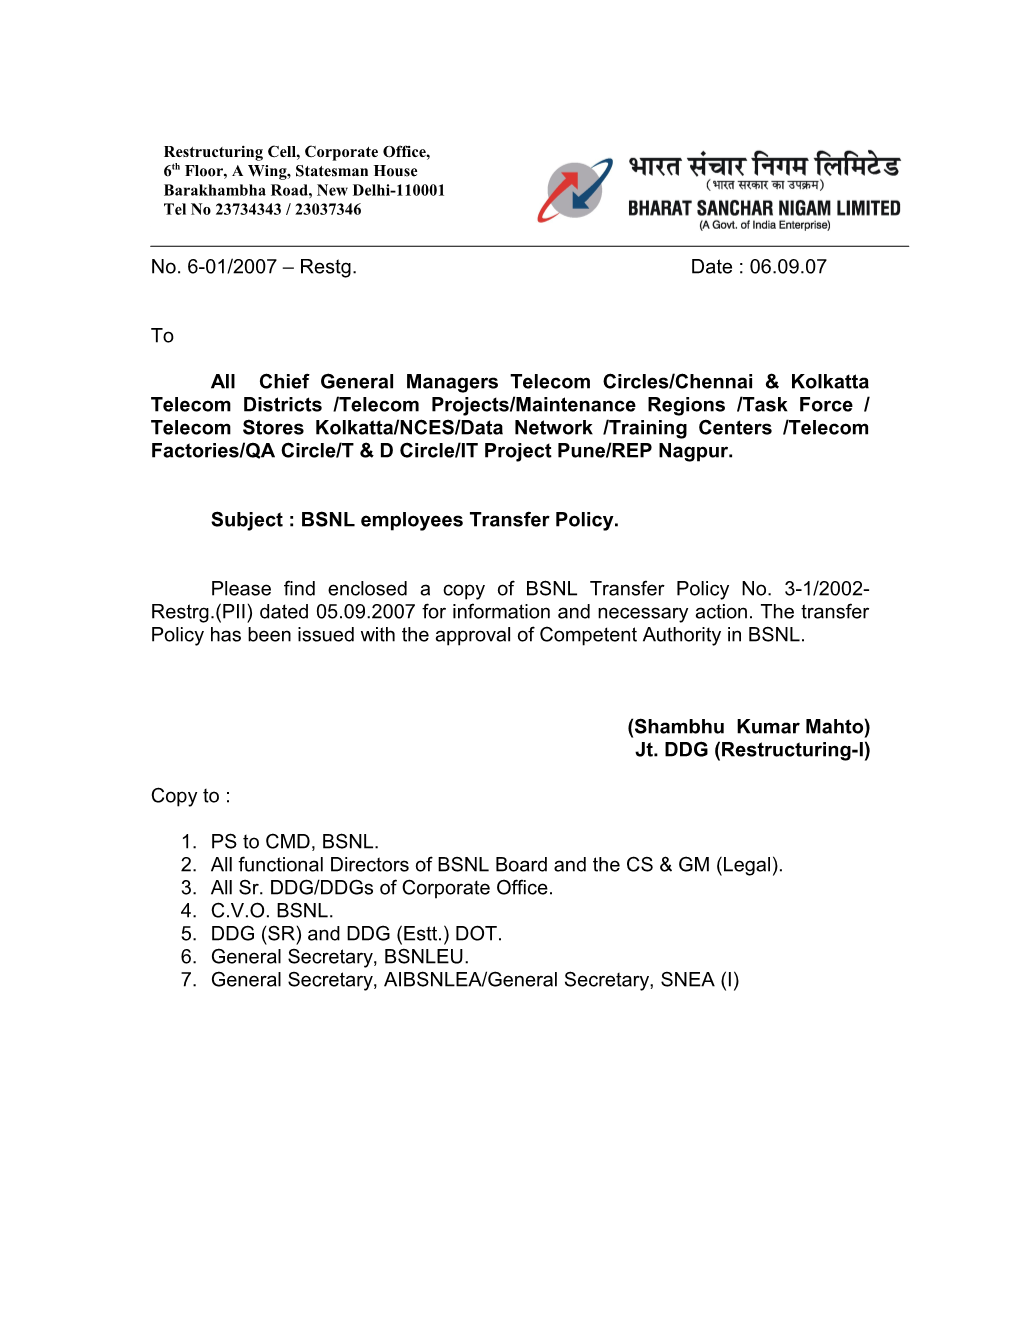 Subject : BSNL Employees Transfer Policy